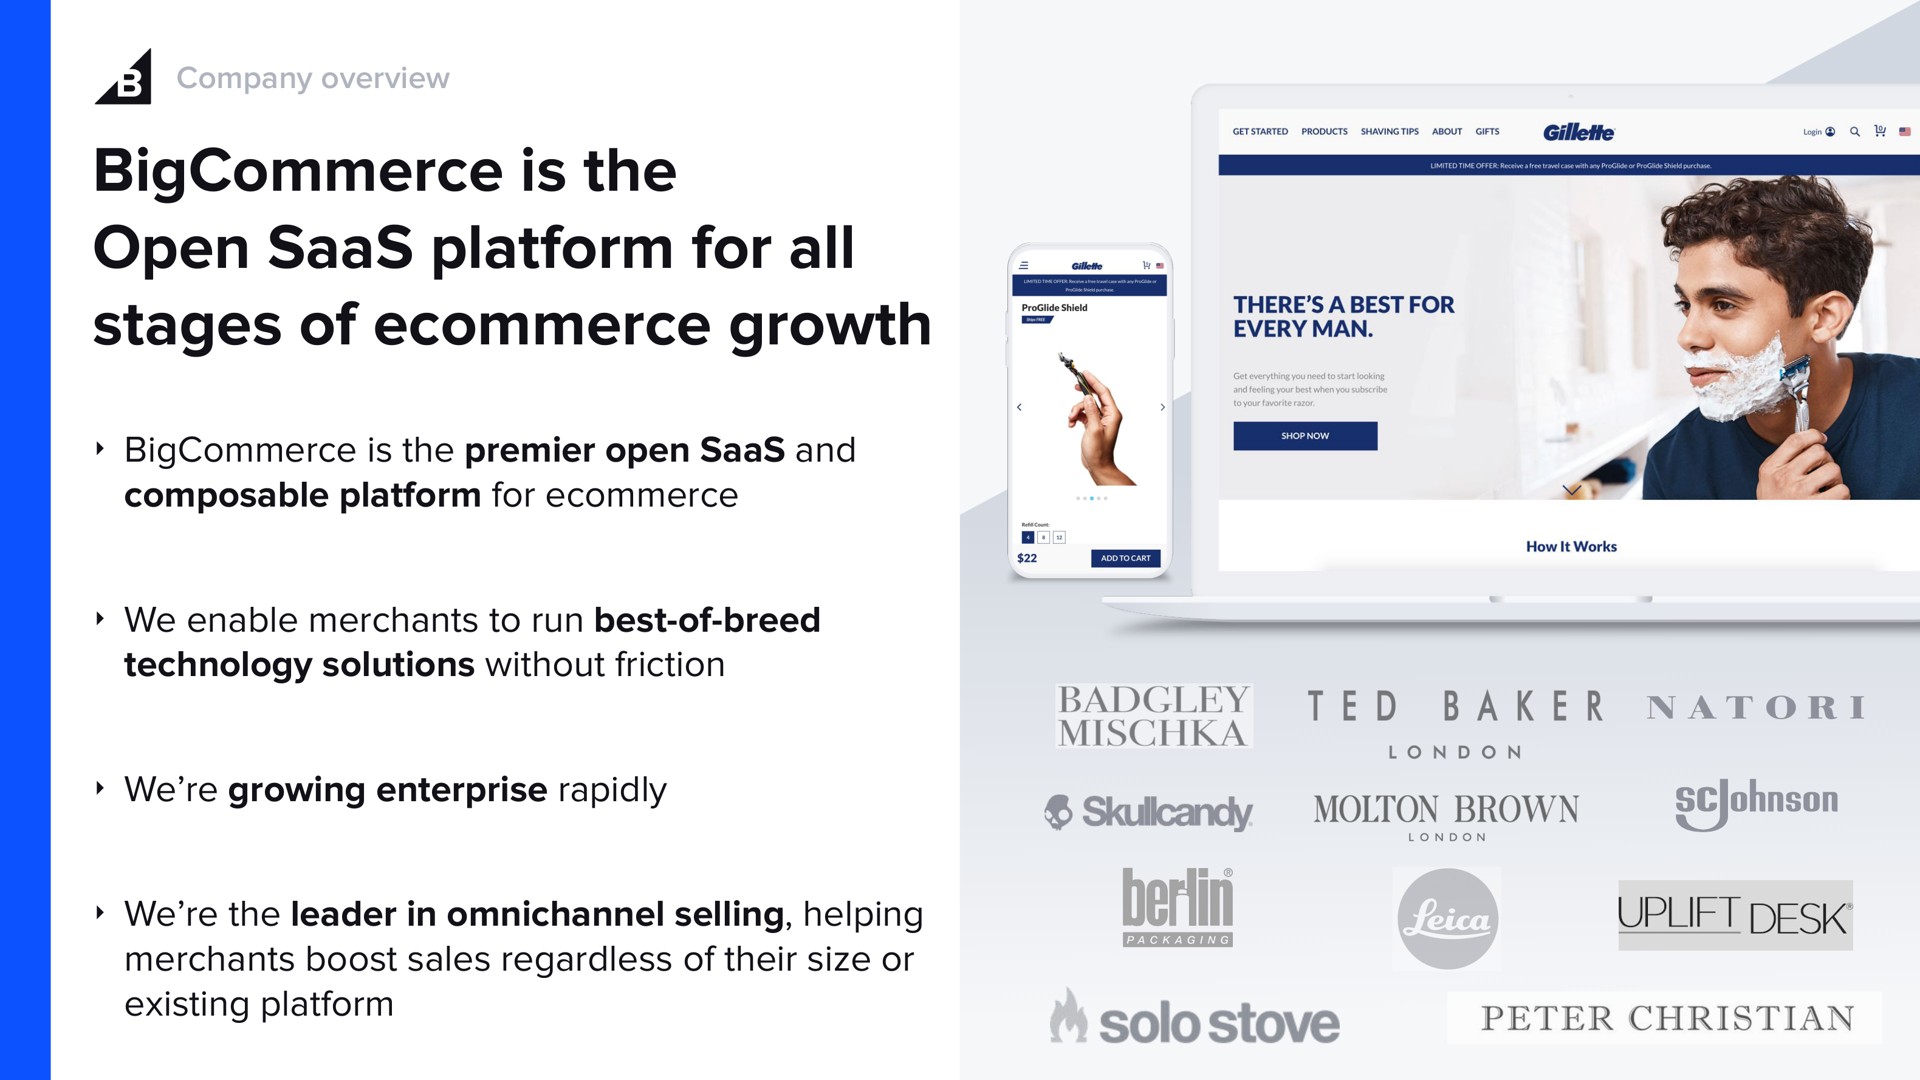 is the open platform for all stages of growth a brown uplift desk | BigCommerce